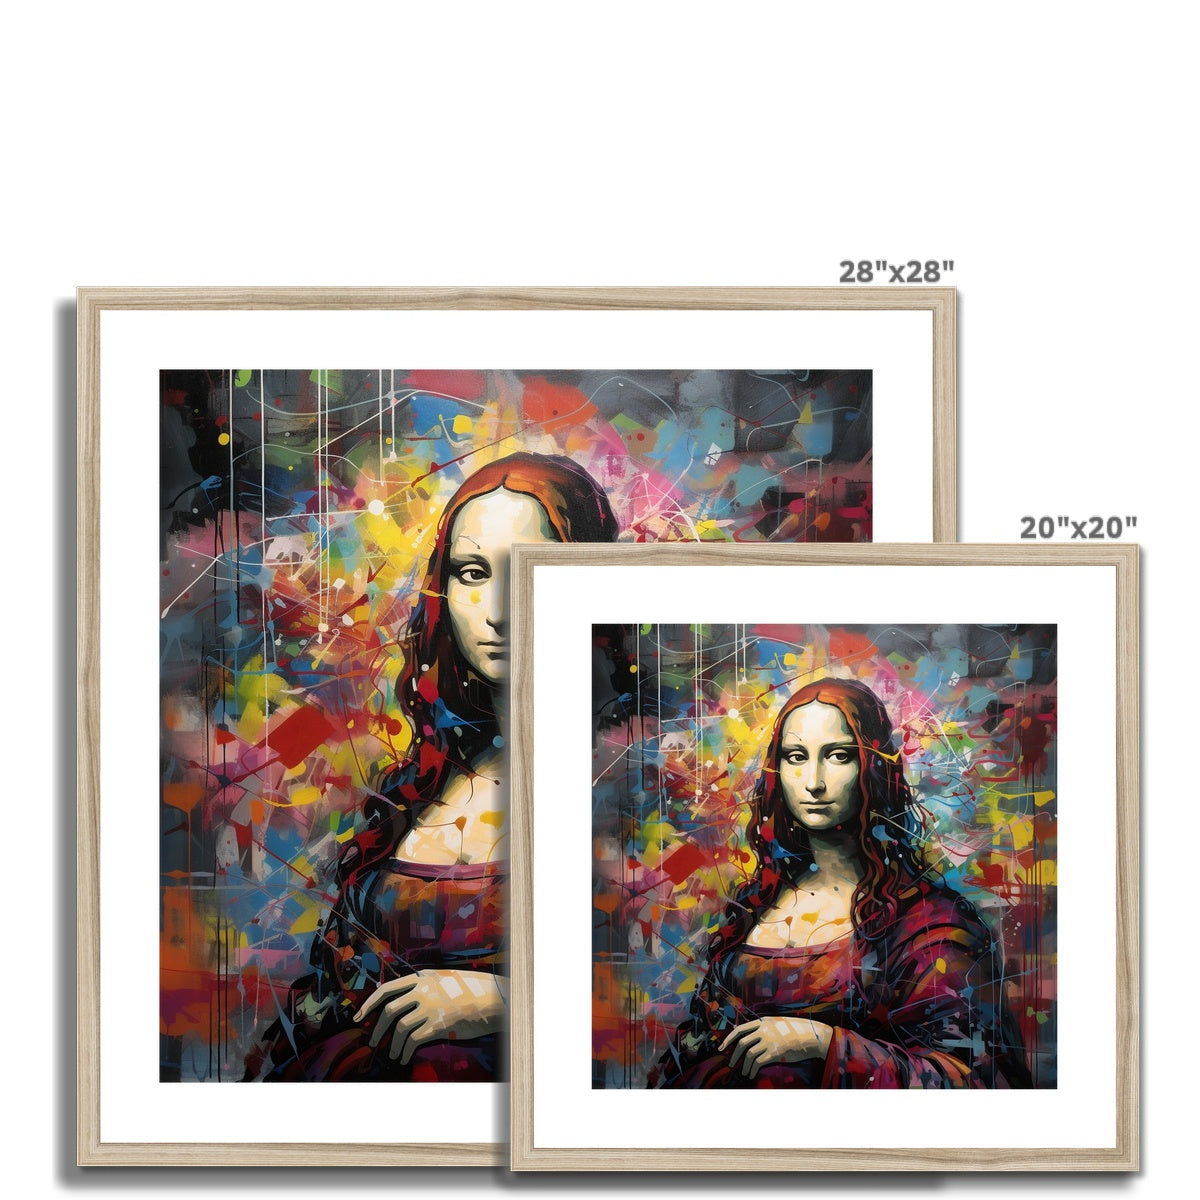 Mona Lisa Meets "Just Stop Oil": Limited Edition Framed & Mounted Print